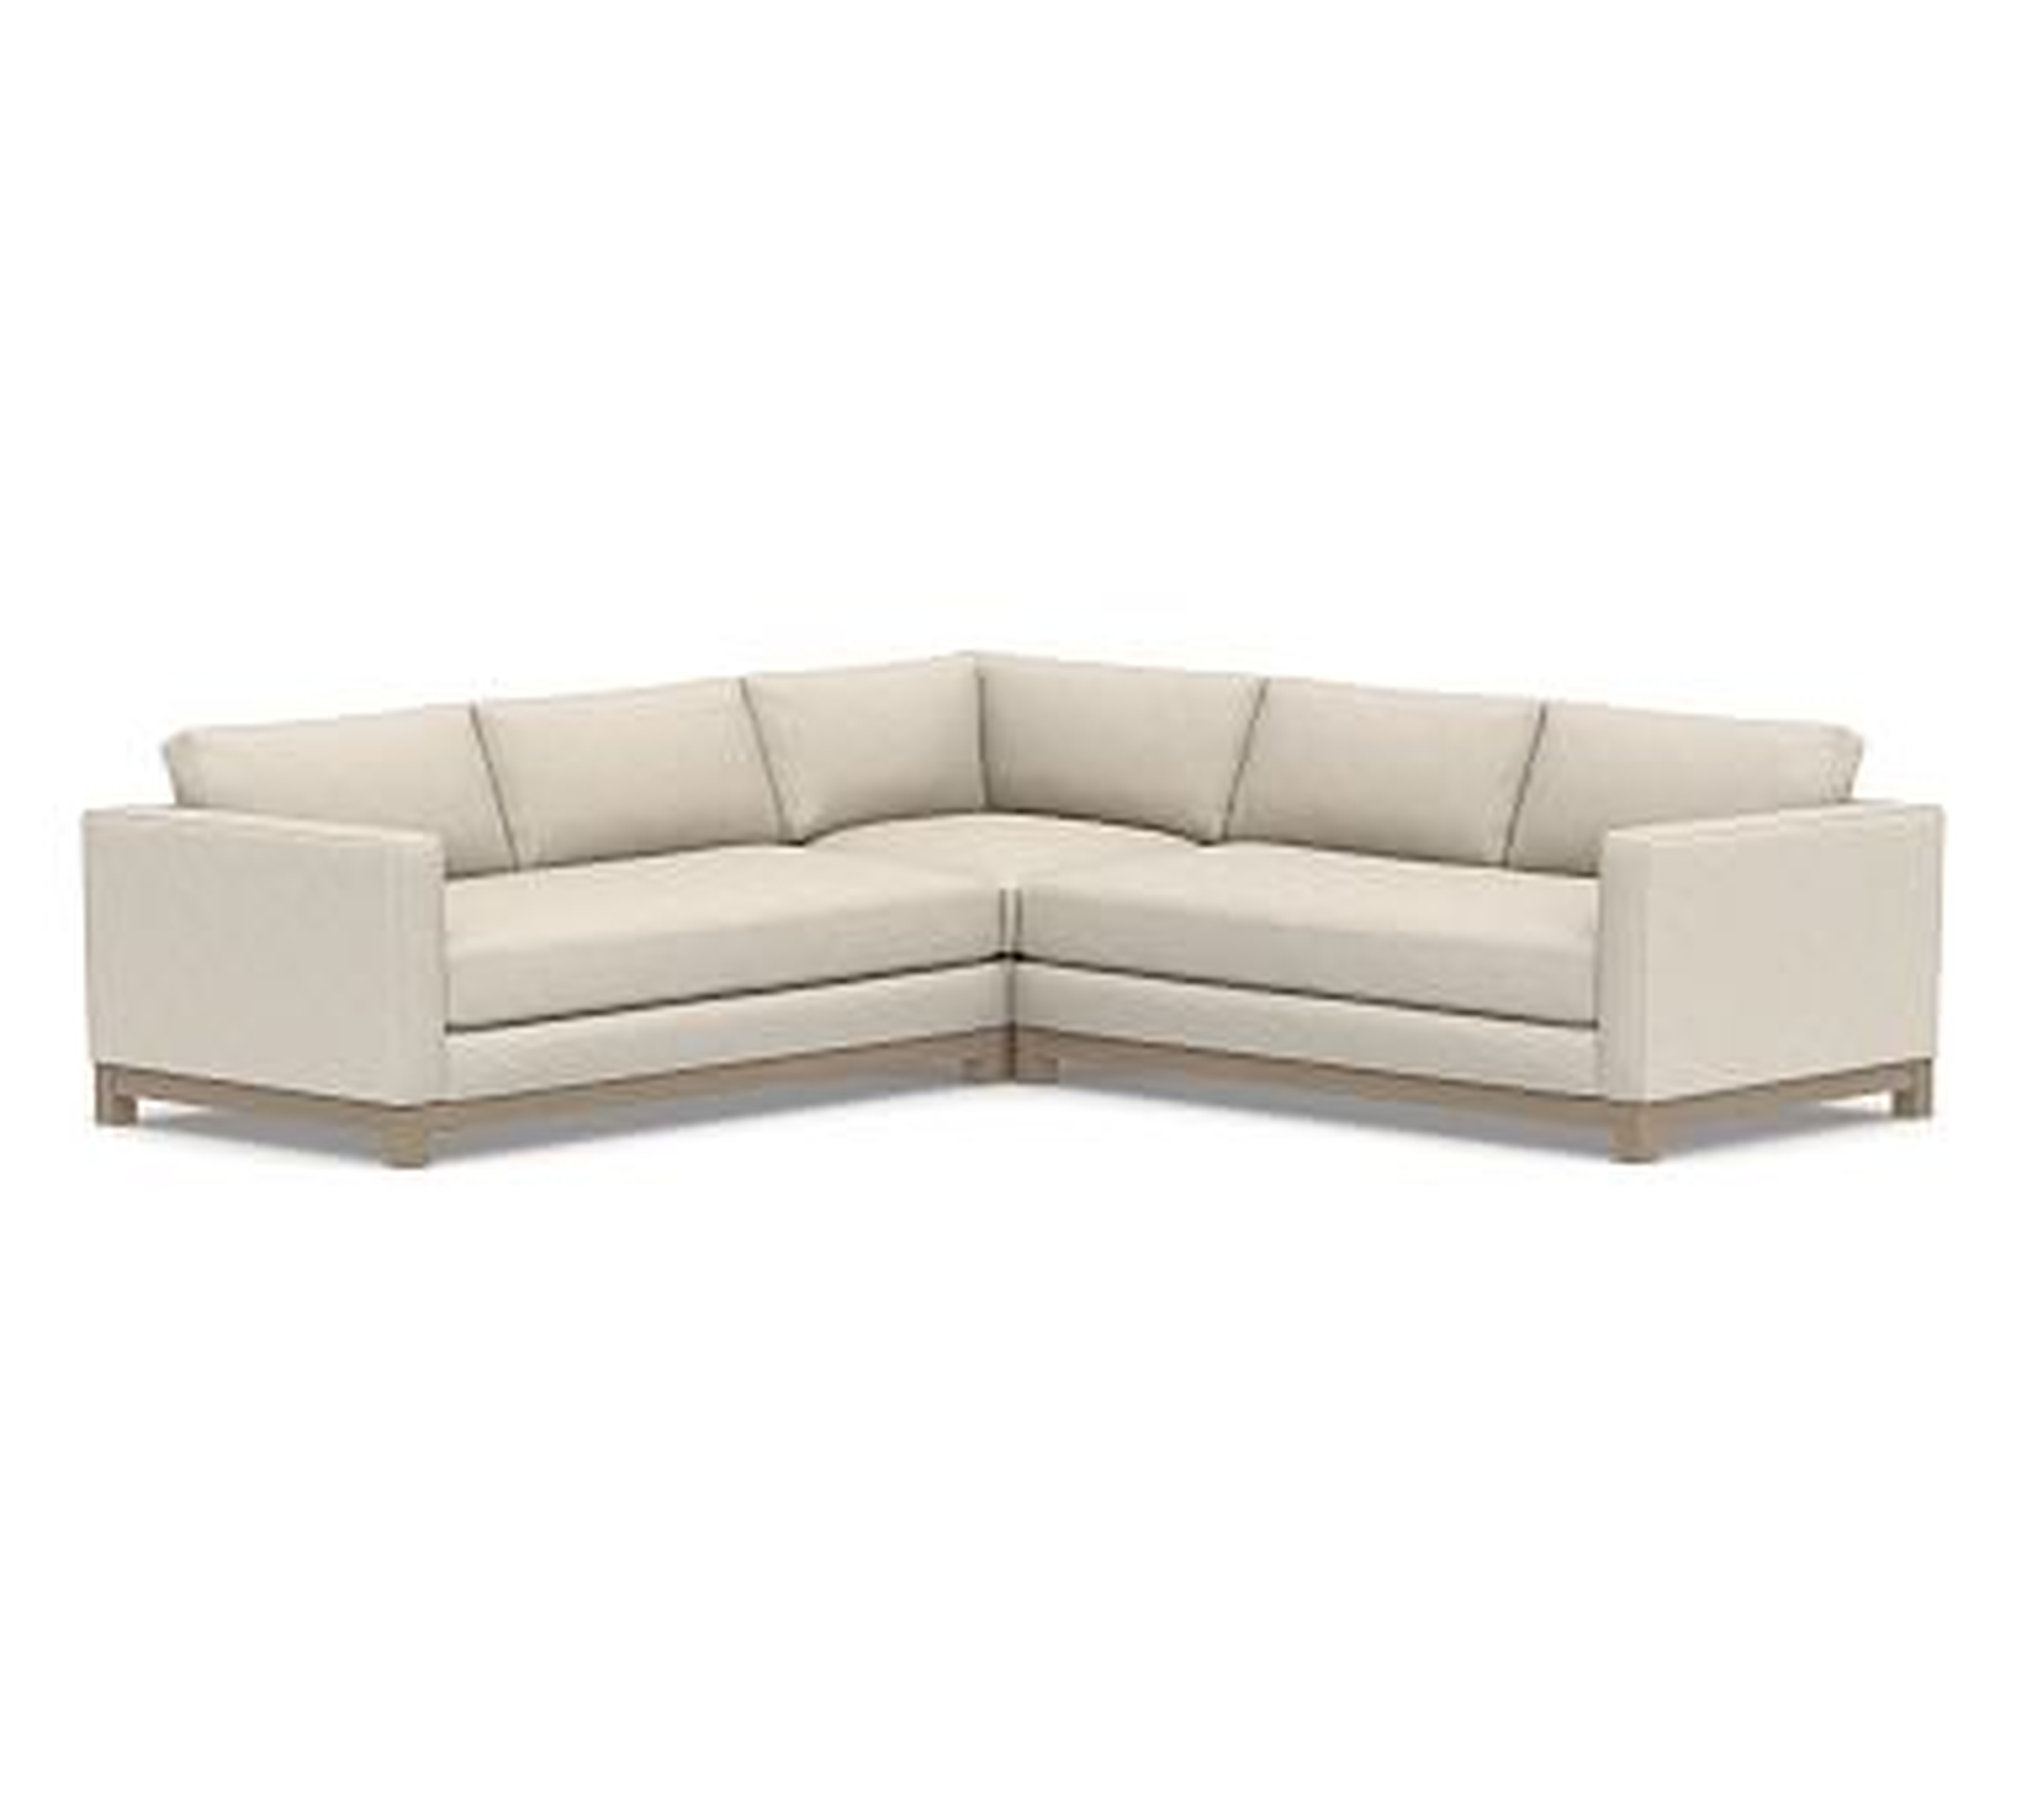 Jake Upholstered 3-Piece L-Shaped Corner Sectional 2x1, Bench Cushion, with Wood Legs, Polyester Wrapped Cushions, Performance Slub Cotton Stone - Pottery Barn